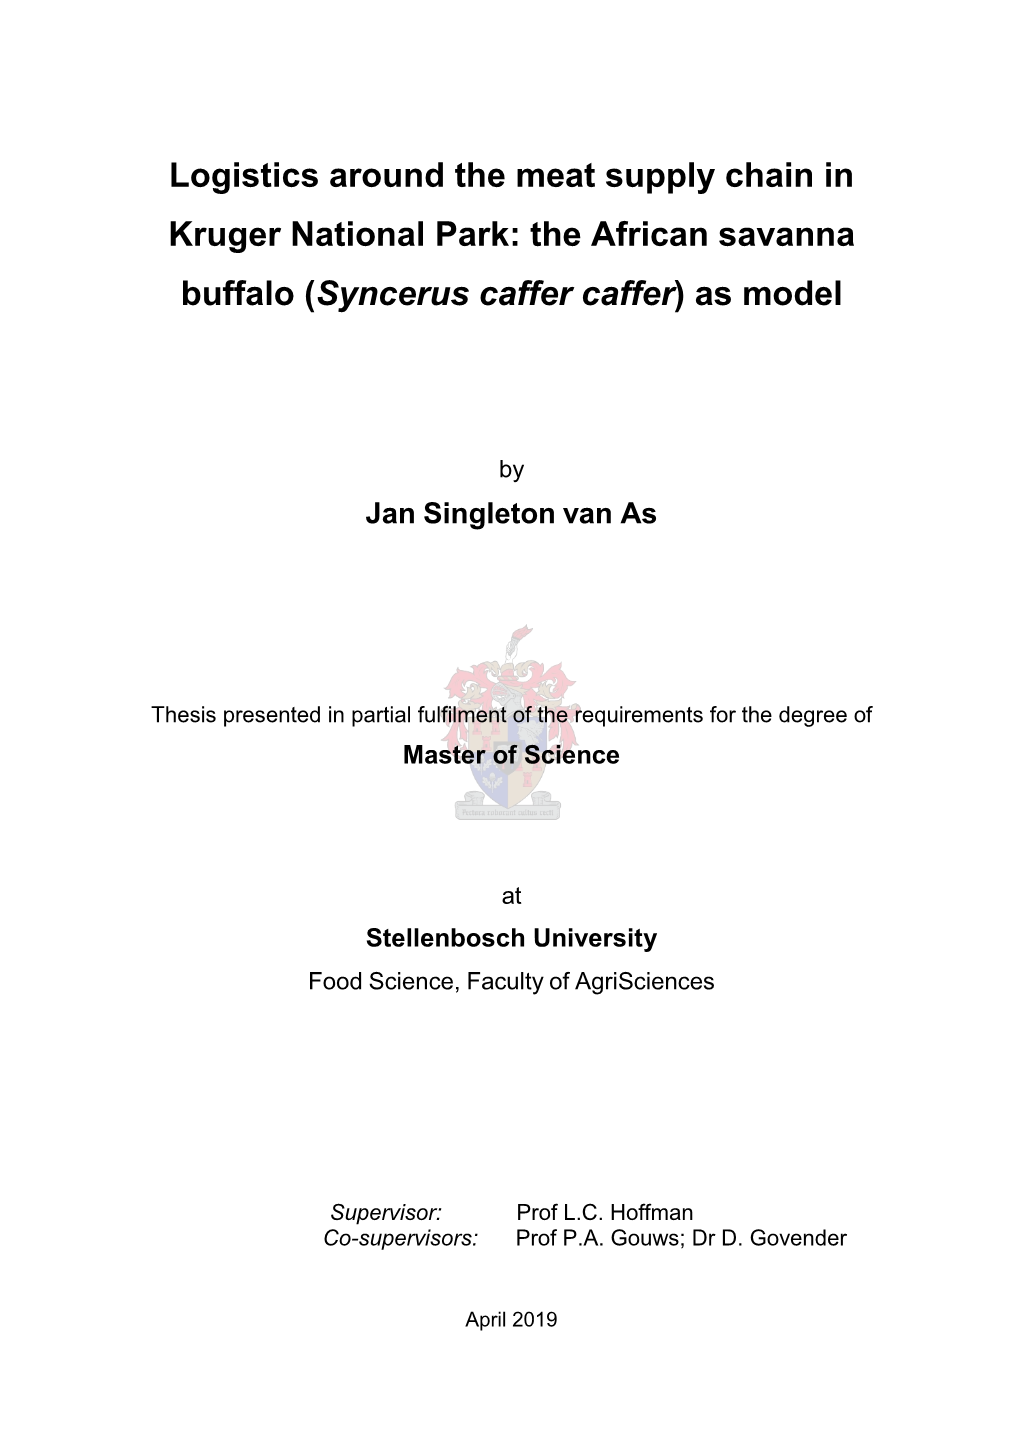 Logistics Around the Meat Supply Chain in Kruger National Park: the African Savanna Buffalo (Syncerus Caffer Caffer) As Model